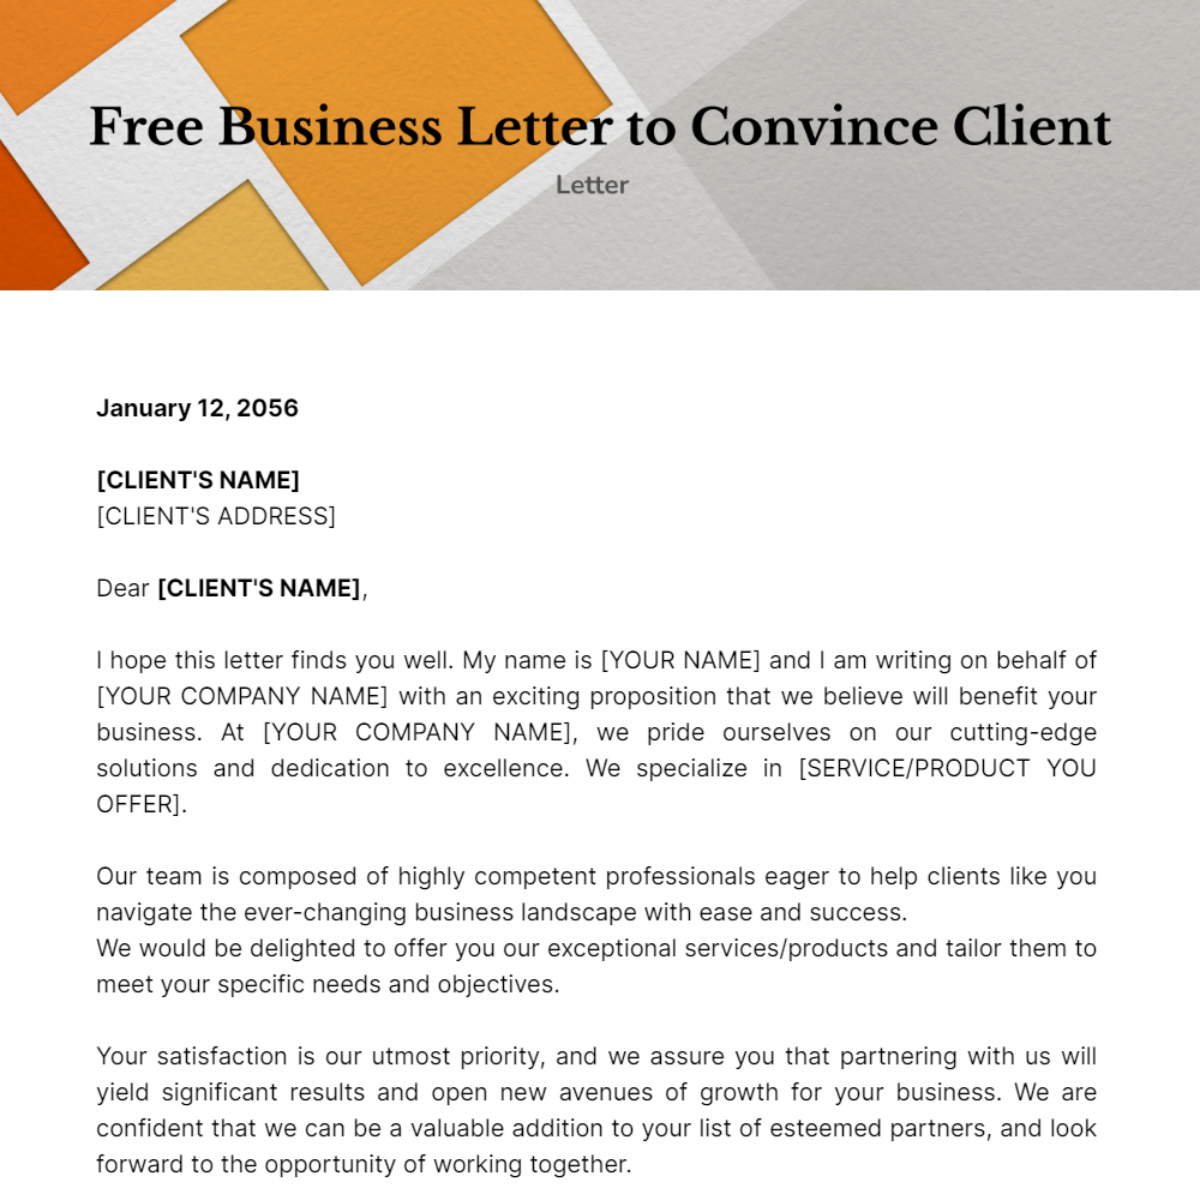 Business Letter to Convince Client Template